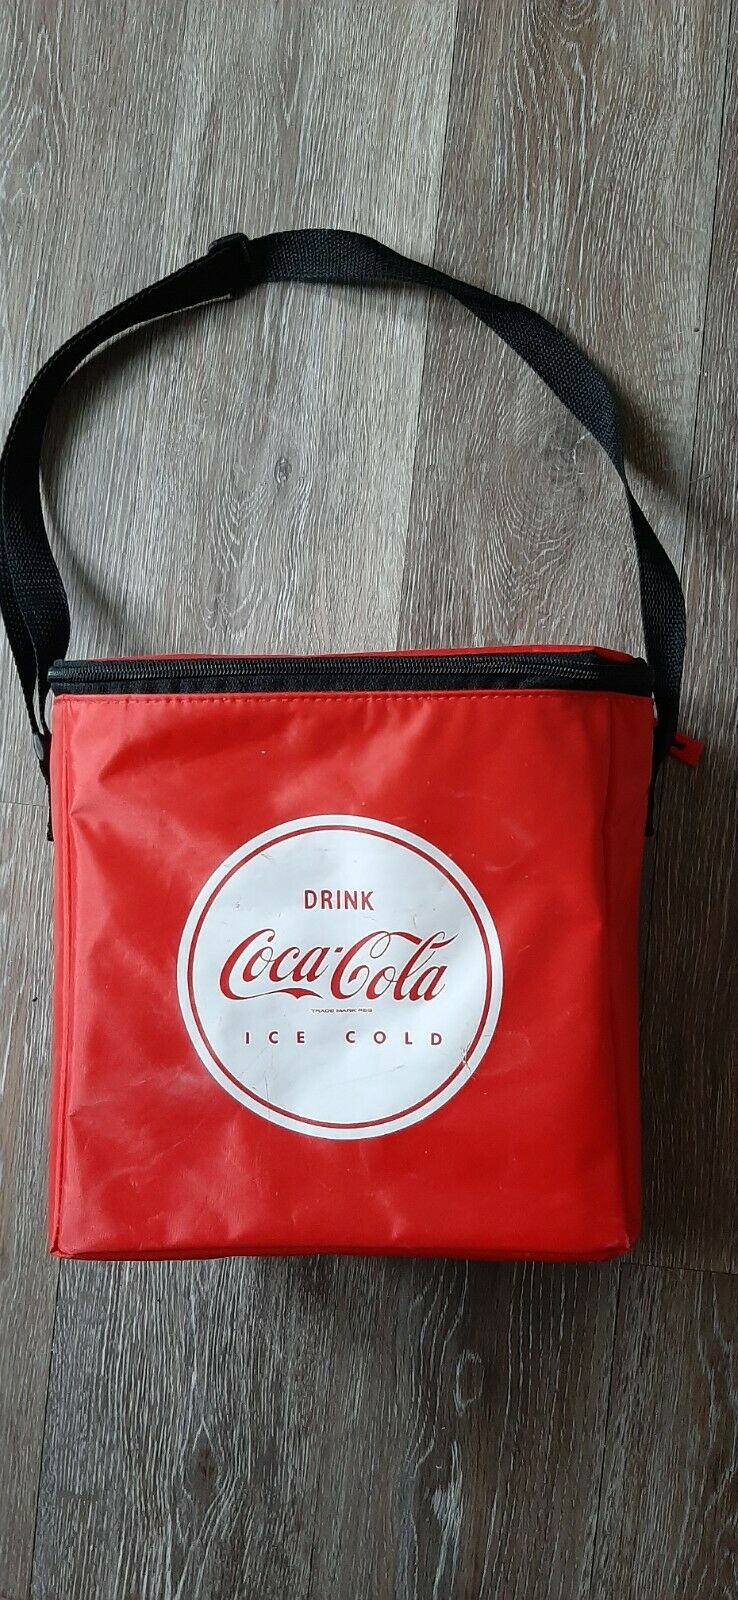 Coca-cola Thermal Insulated Cooler Collapsible Shoulder Strap Coke Soda Carrier